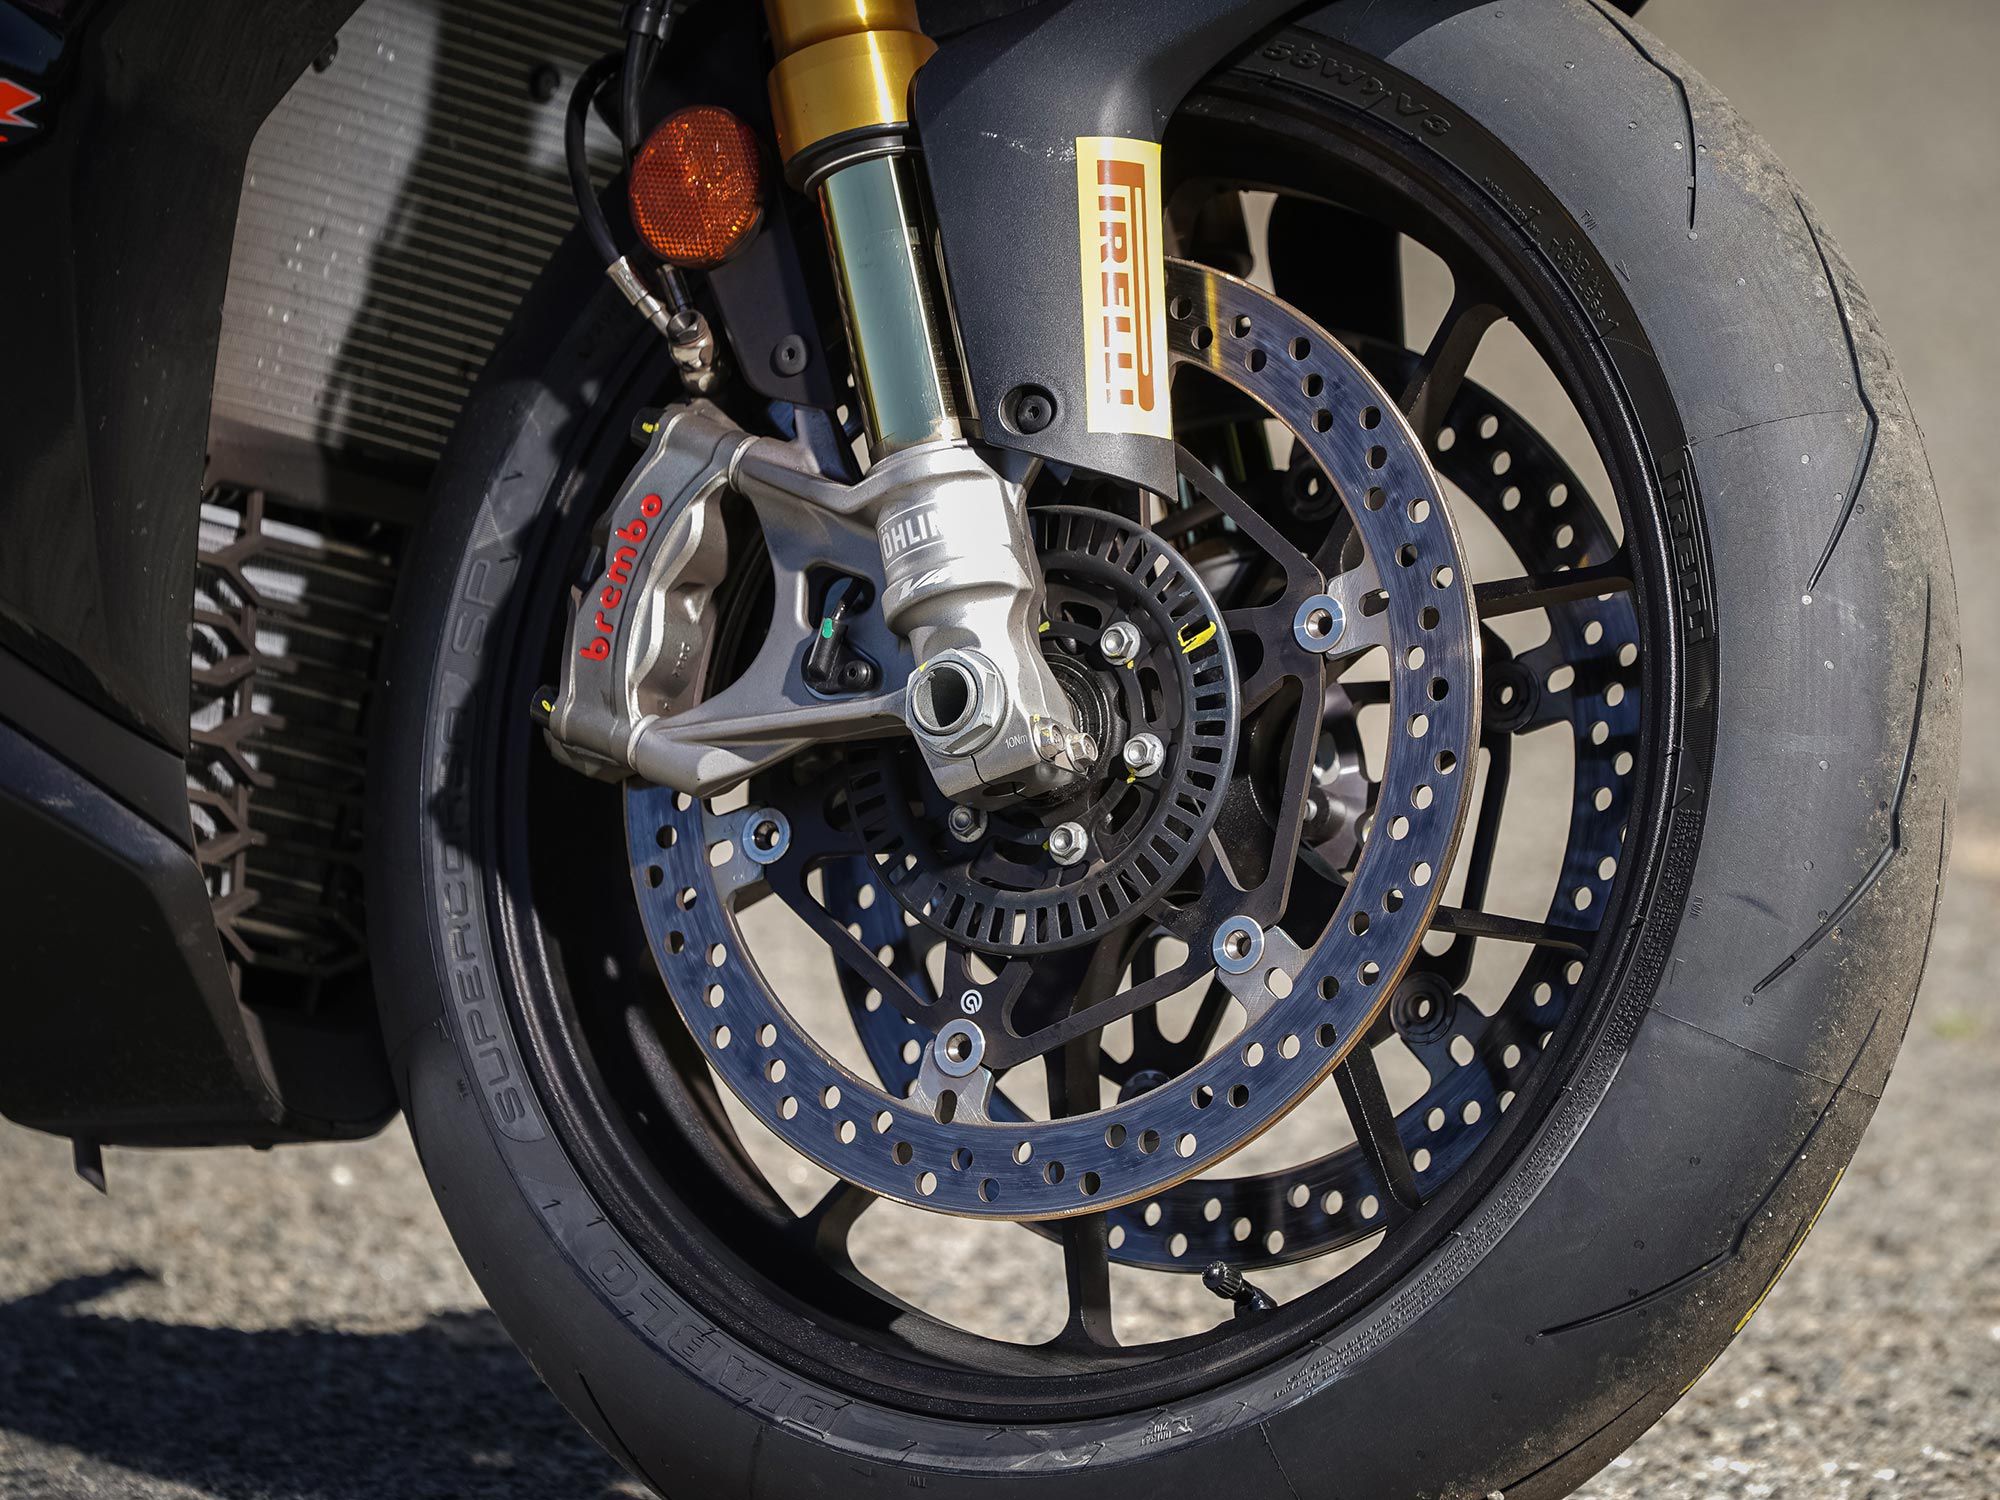 The RSV4 Factory includes semi-active suspension from Ohlins and forged alloy wheels for an $7,000 upcharge.